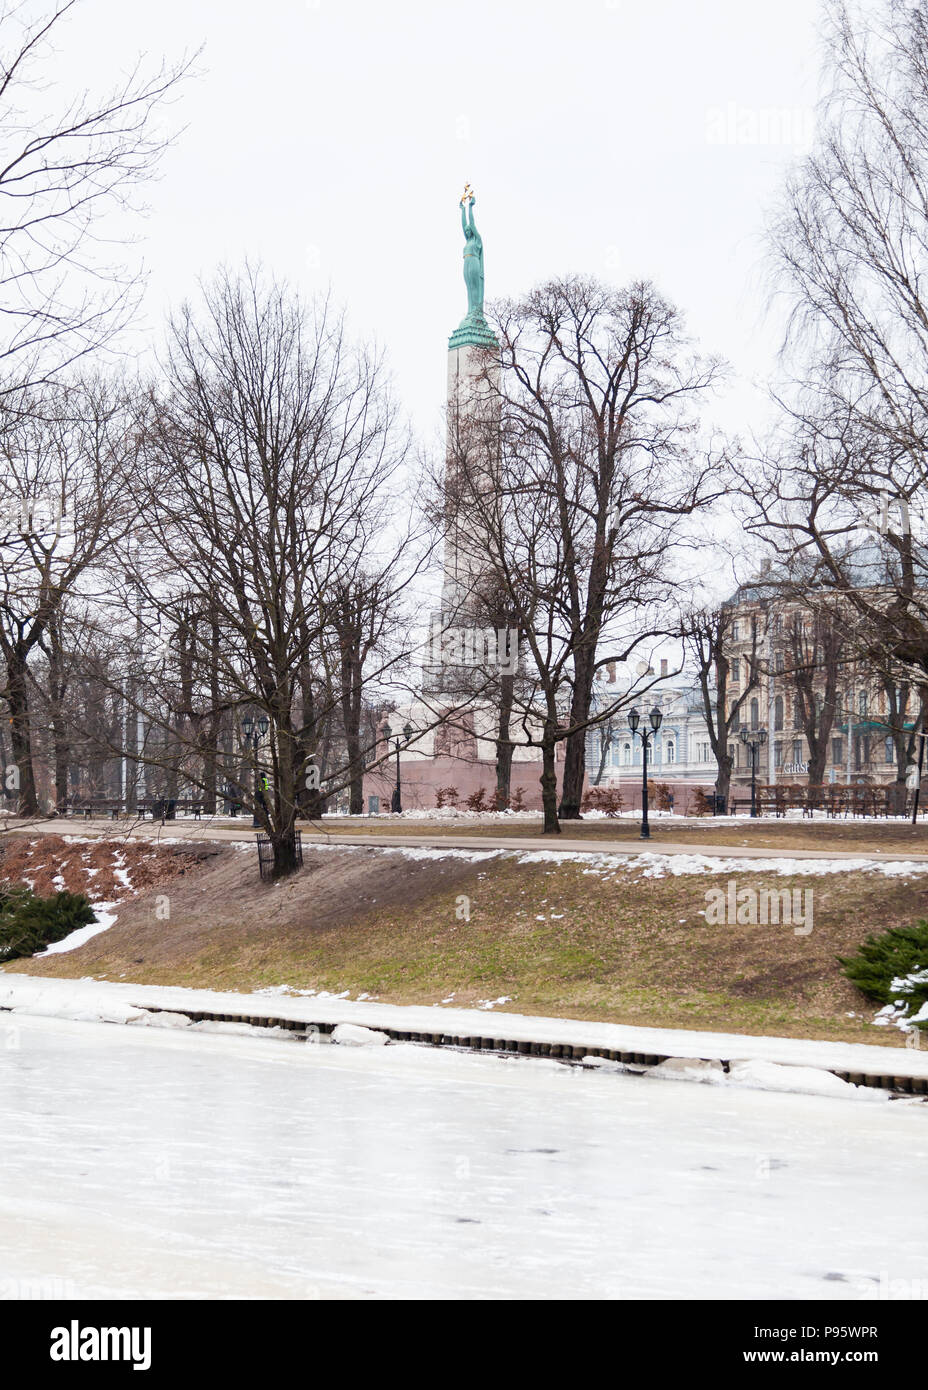 The view across Riga canal towards the Freedom Monument in Riga, Latva.  The memorial honours soldiers killed during the Latvian War of Independence. Stock Photo